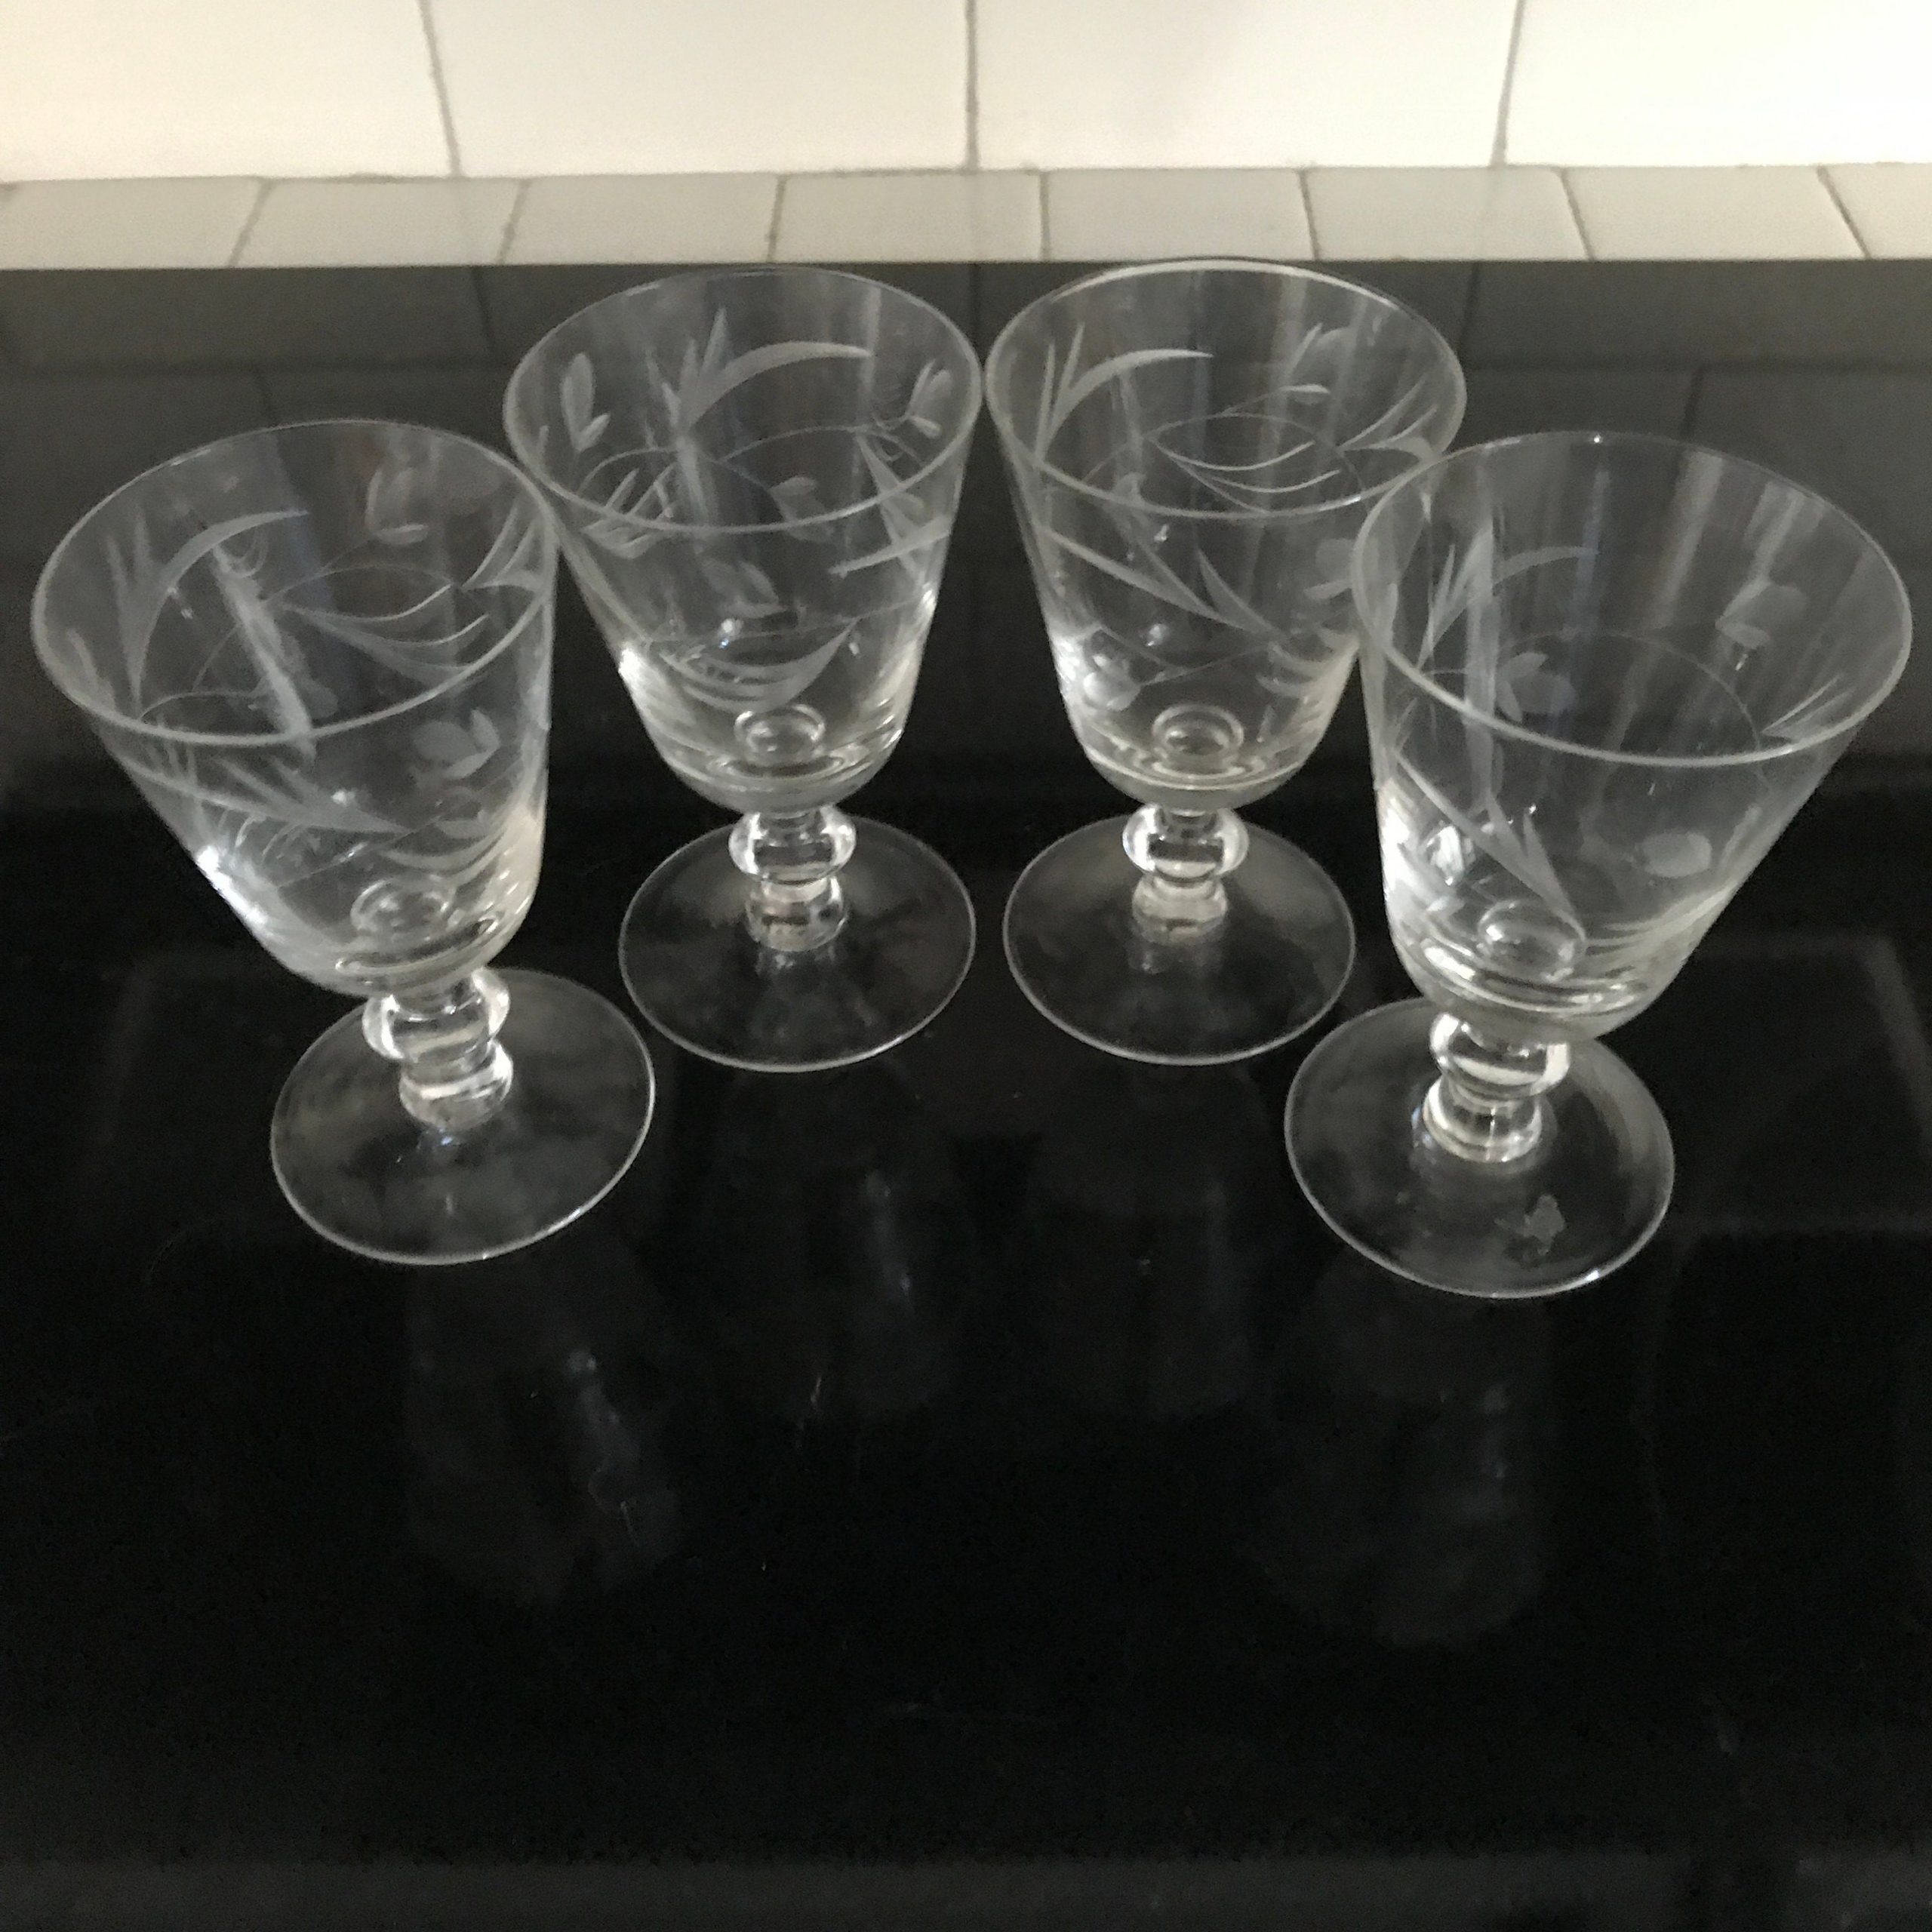 4 Vintage Etched Tall Wine Glasses ~ Water Goblets, Faceted Stem Etched Wine  Glasses, Unique Etched Stem Wine Glasses, Wedding Glasses